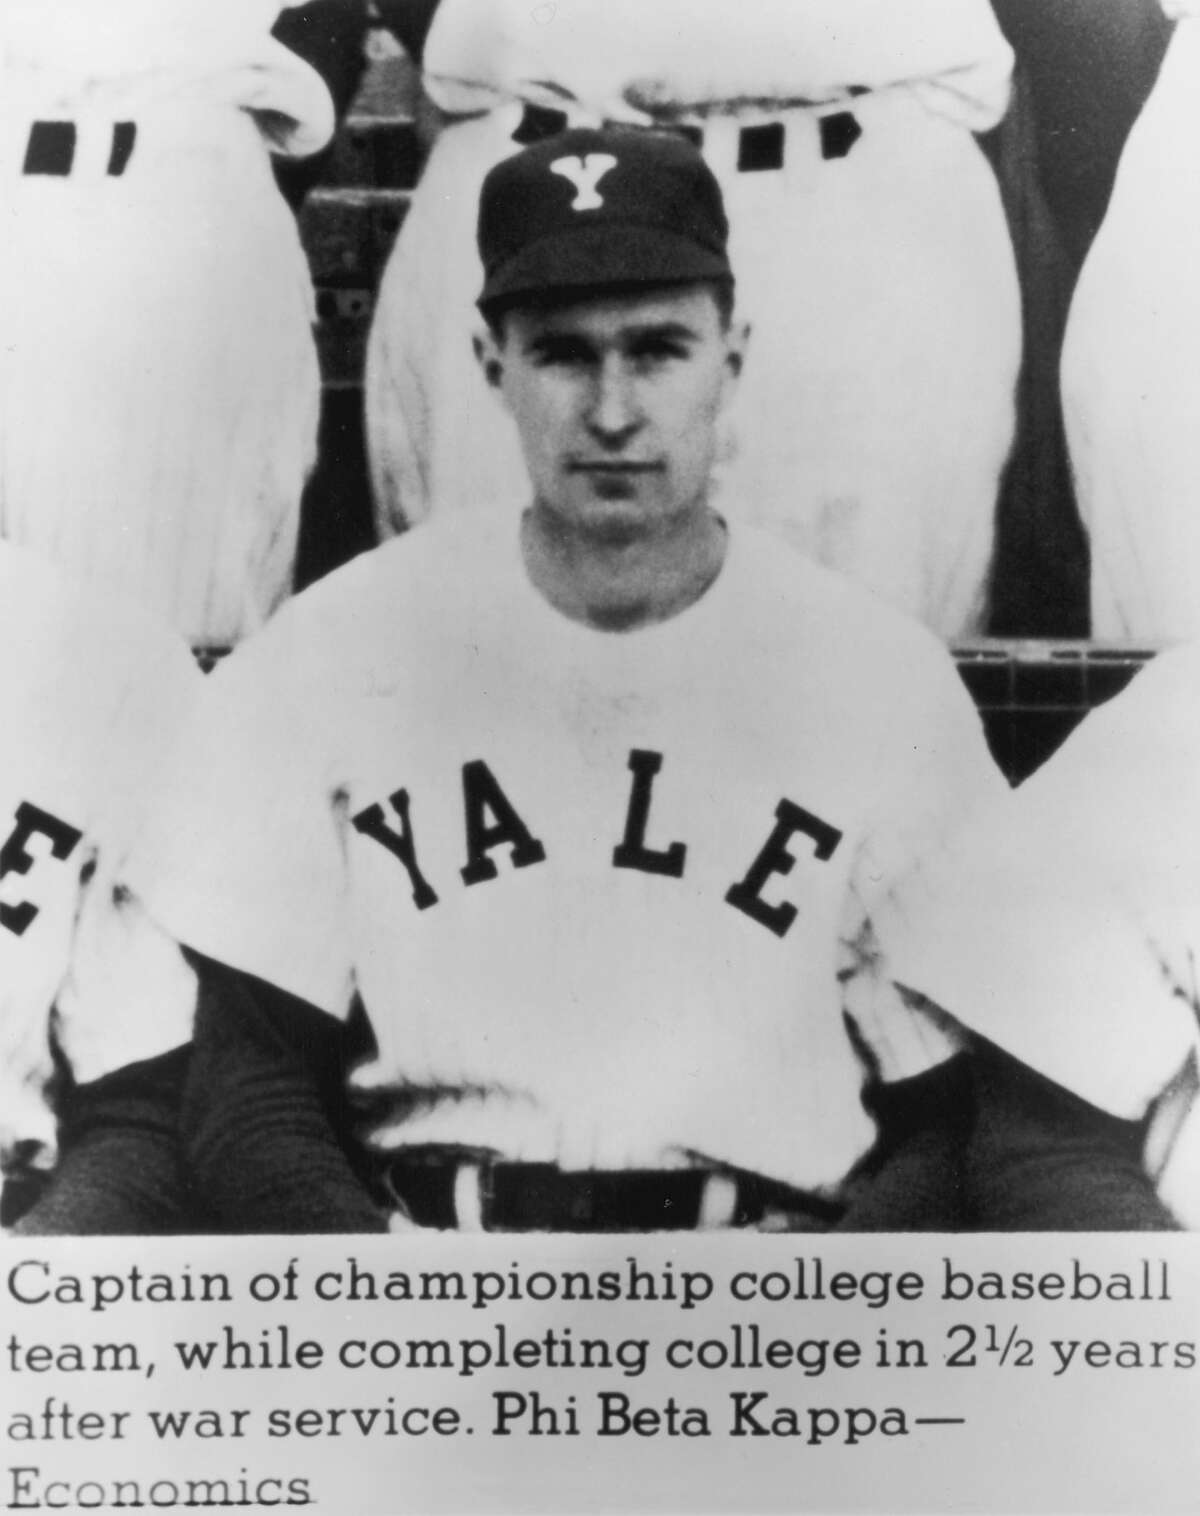 circa 1946: Portrait of future U.S. president George Bush wearing his team jersey and cap as captain of his college baseball team, Yale University, Connecticut. (Photo by Consolidated News Pictures/Getty Images)